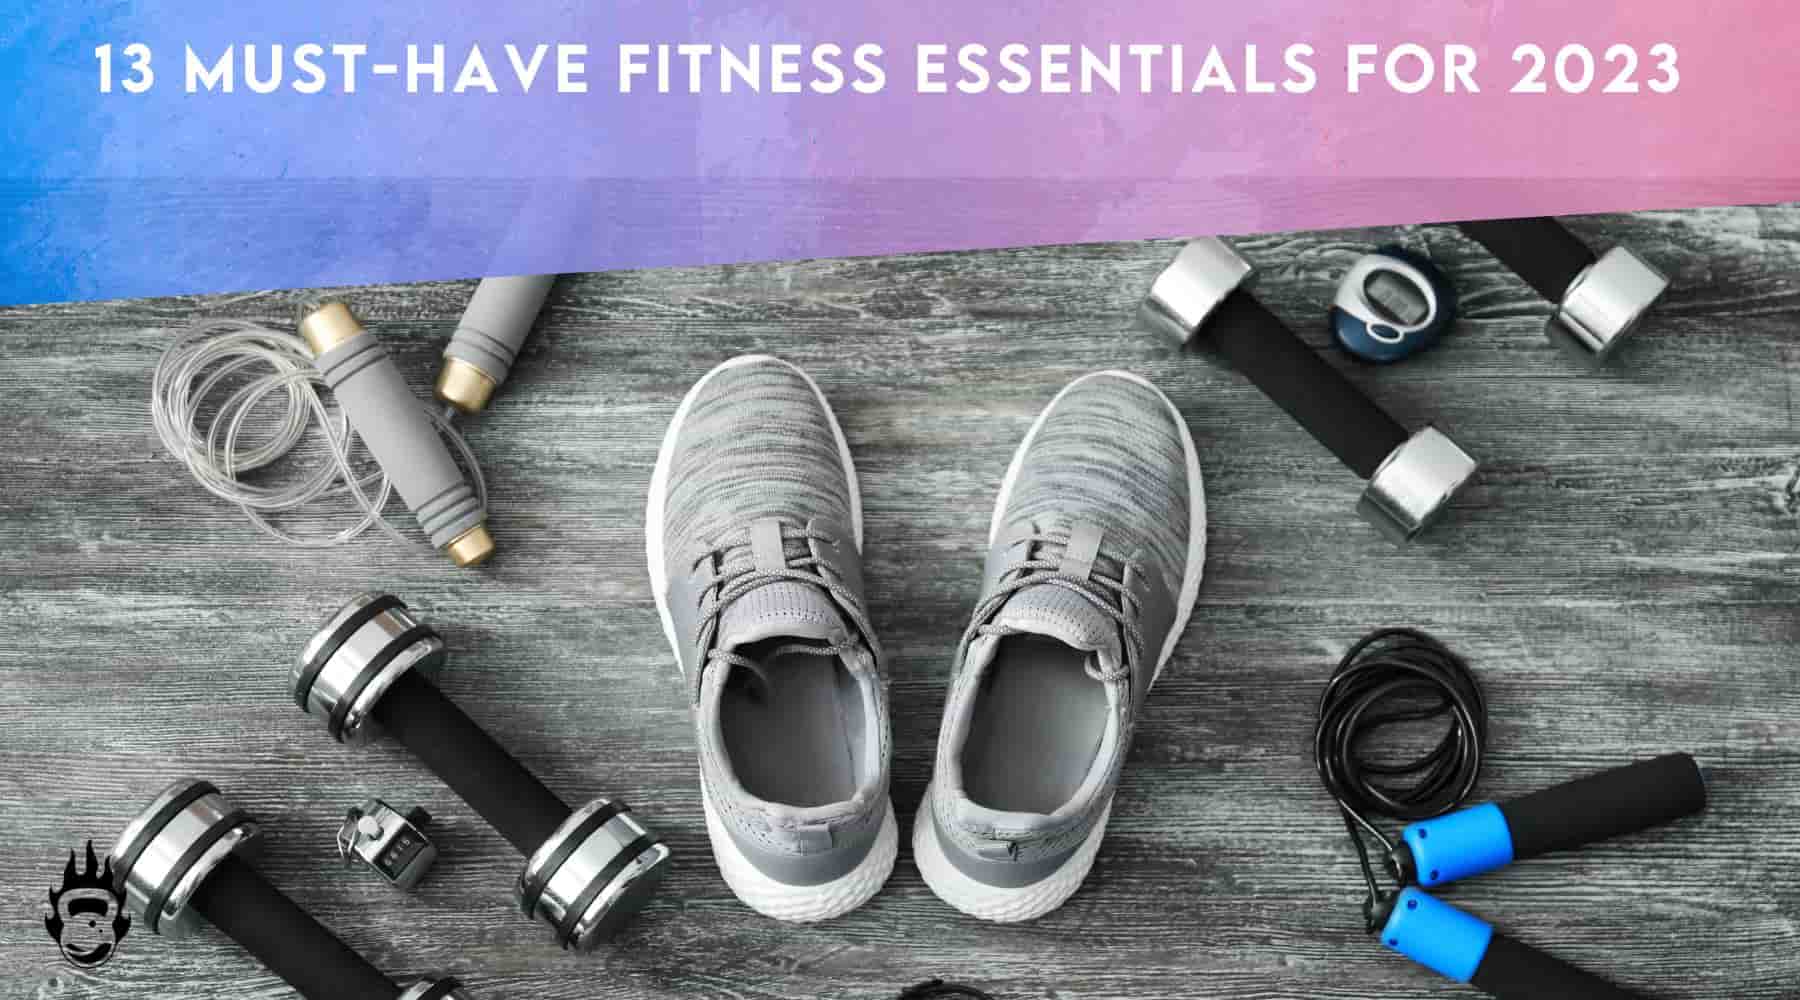 Everyday Fitness Essentials Every Woman Should Own